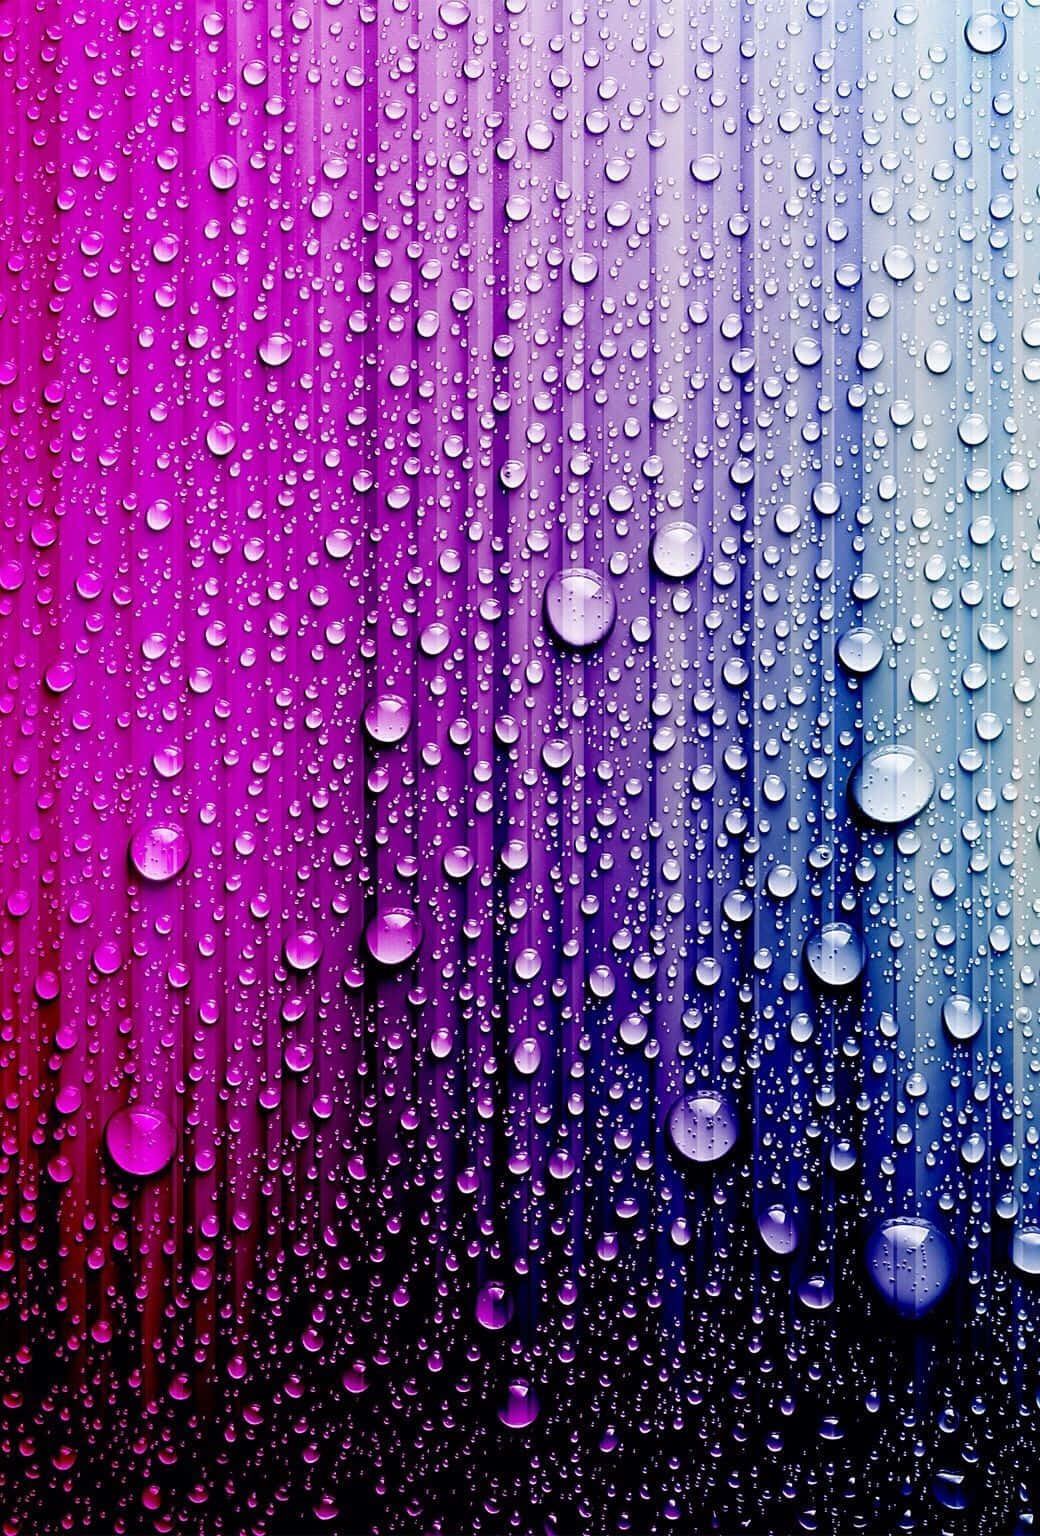 Portrait Blue And Purple Water Drops Cool Photos Background